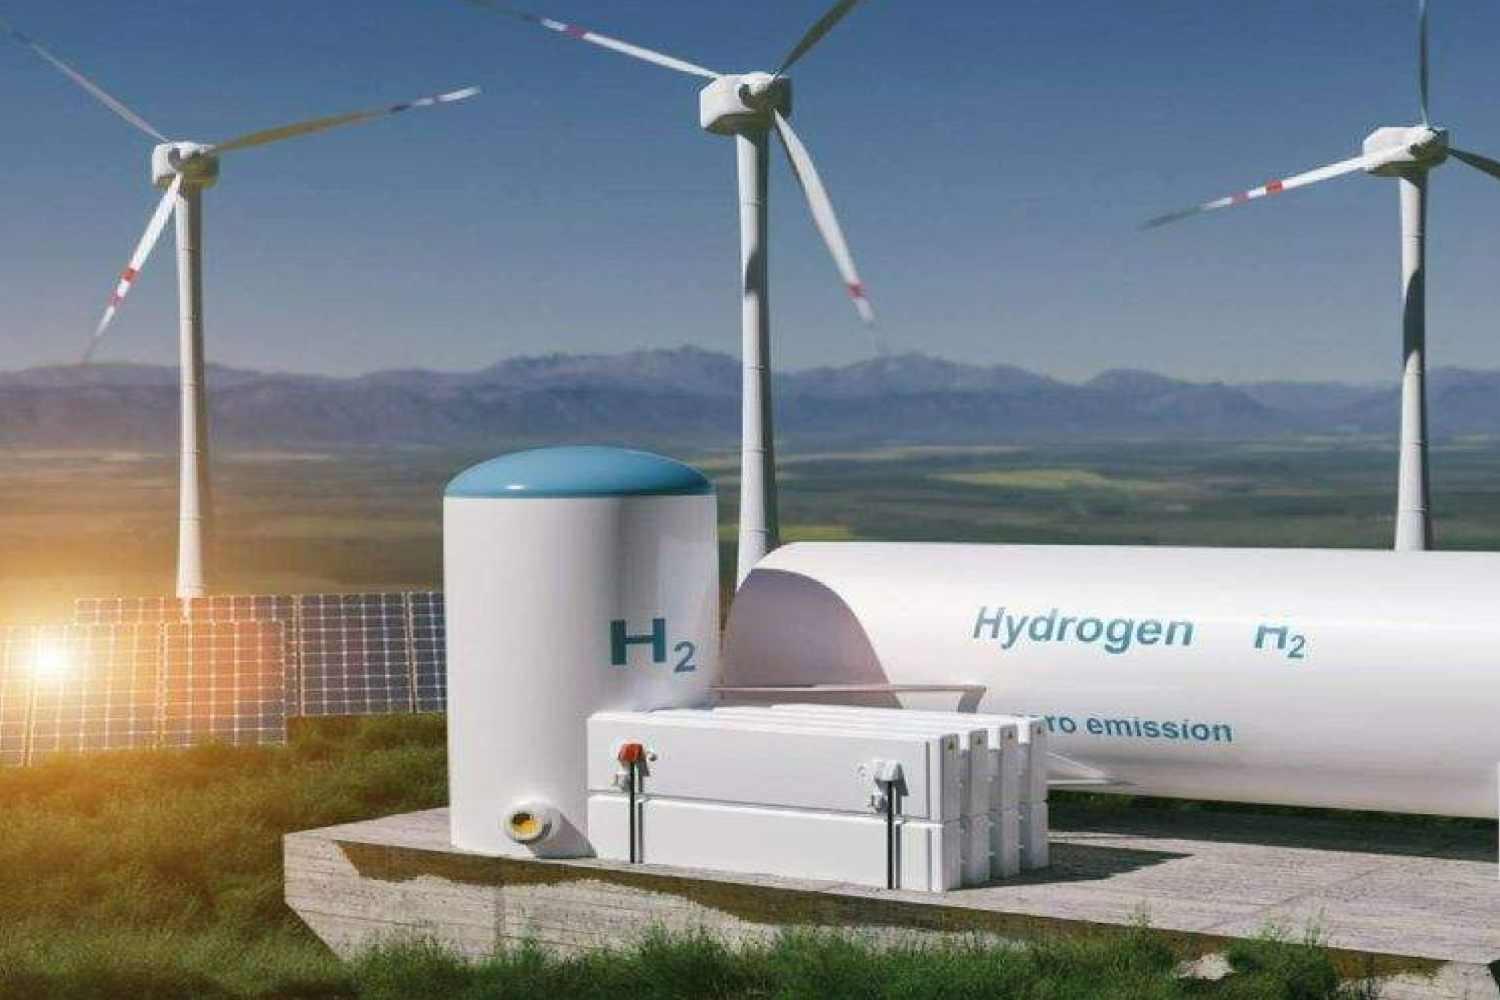 The Path Towards Africa’s $1.5 Trillion Green Hydrogen Economy